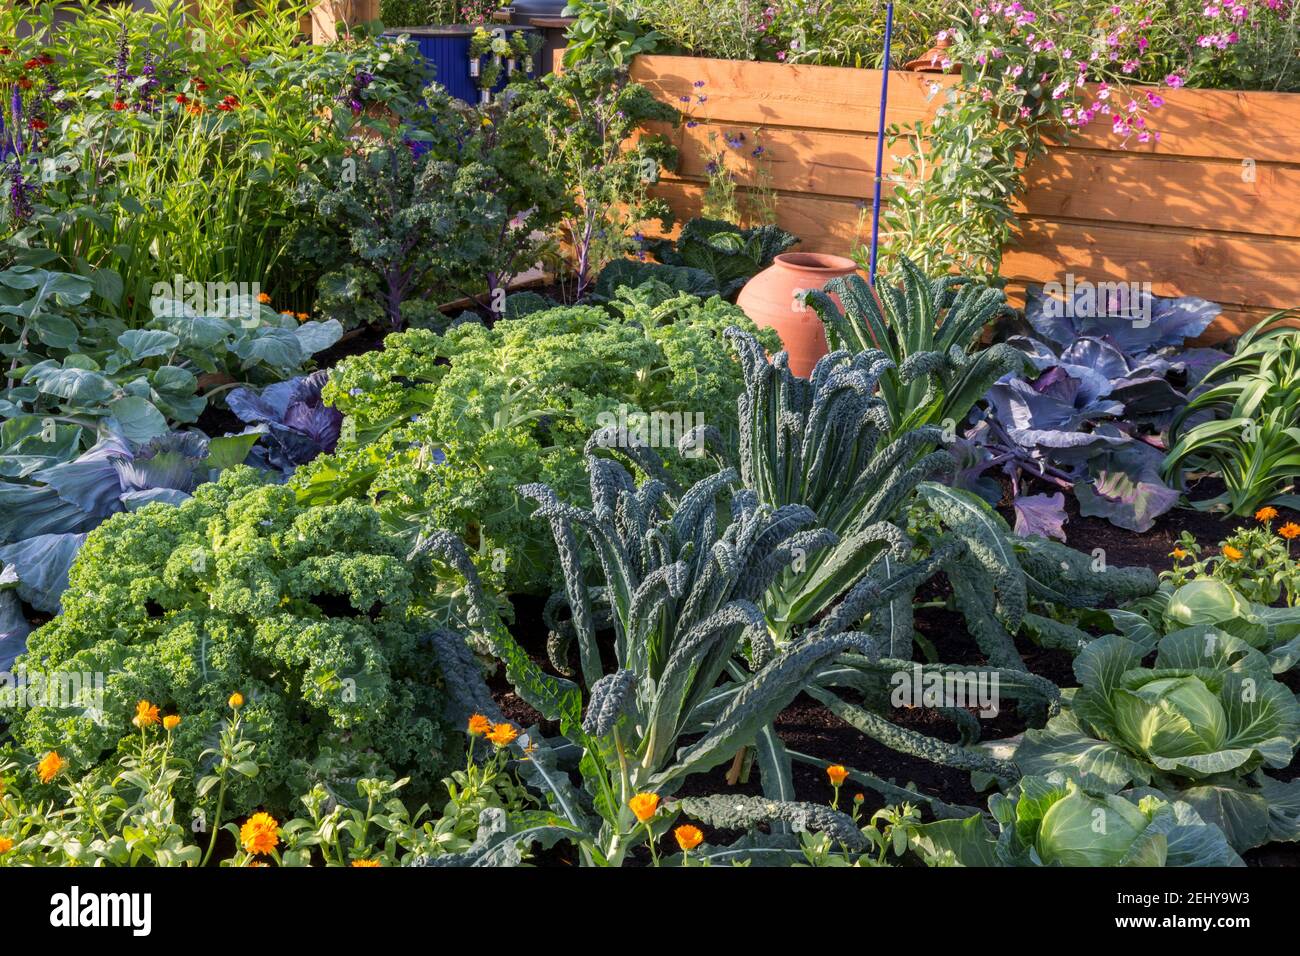 small organic kitchen vegetable garden with veg vegetables growing in rows - leeks red cabbages, kale nero de toscano and curly kale Summer England UK Stock Photo